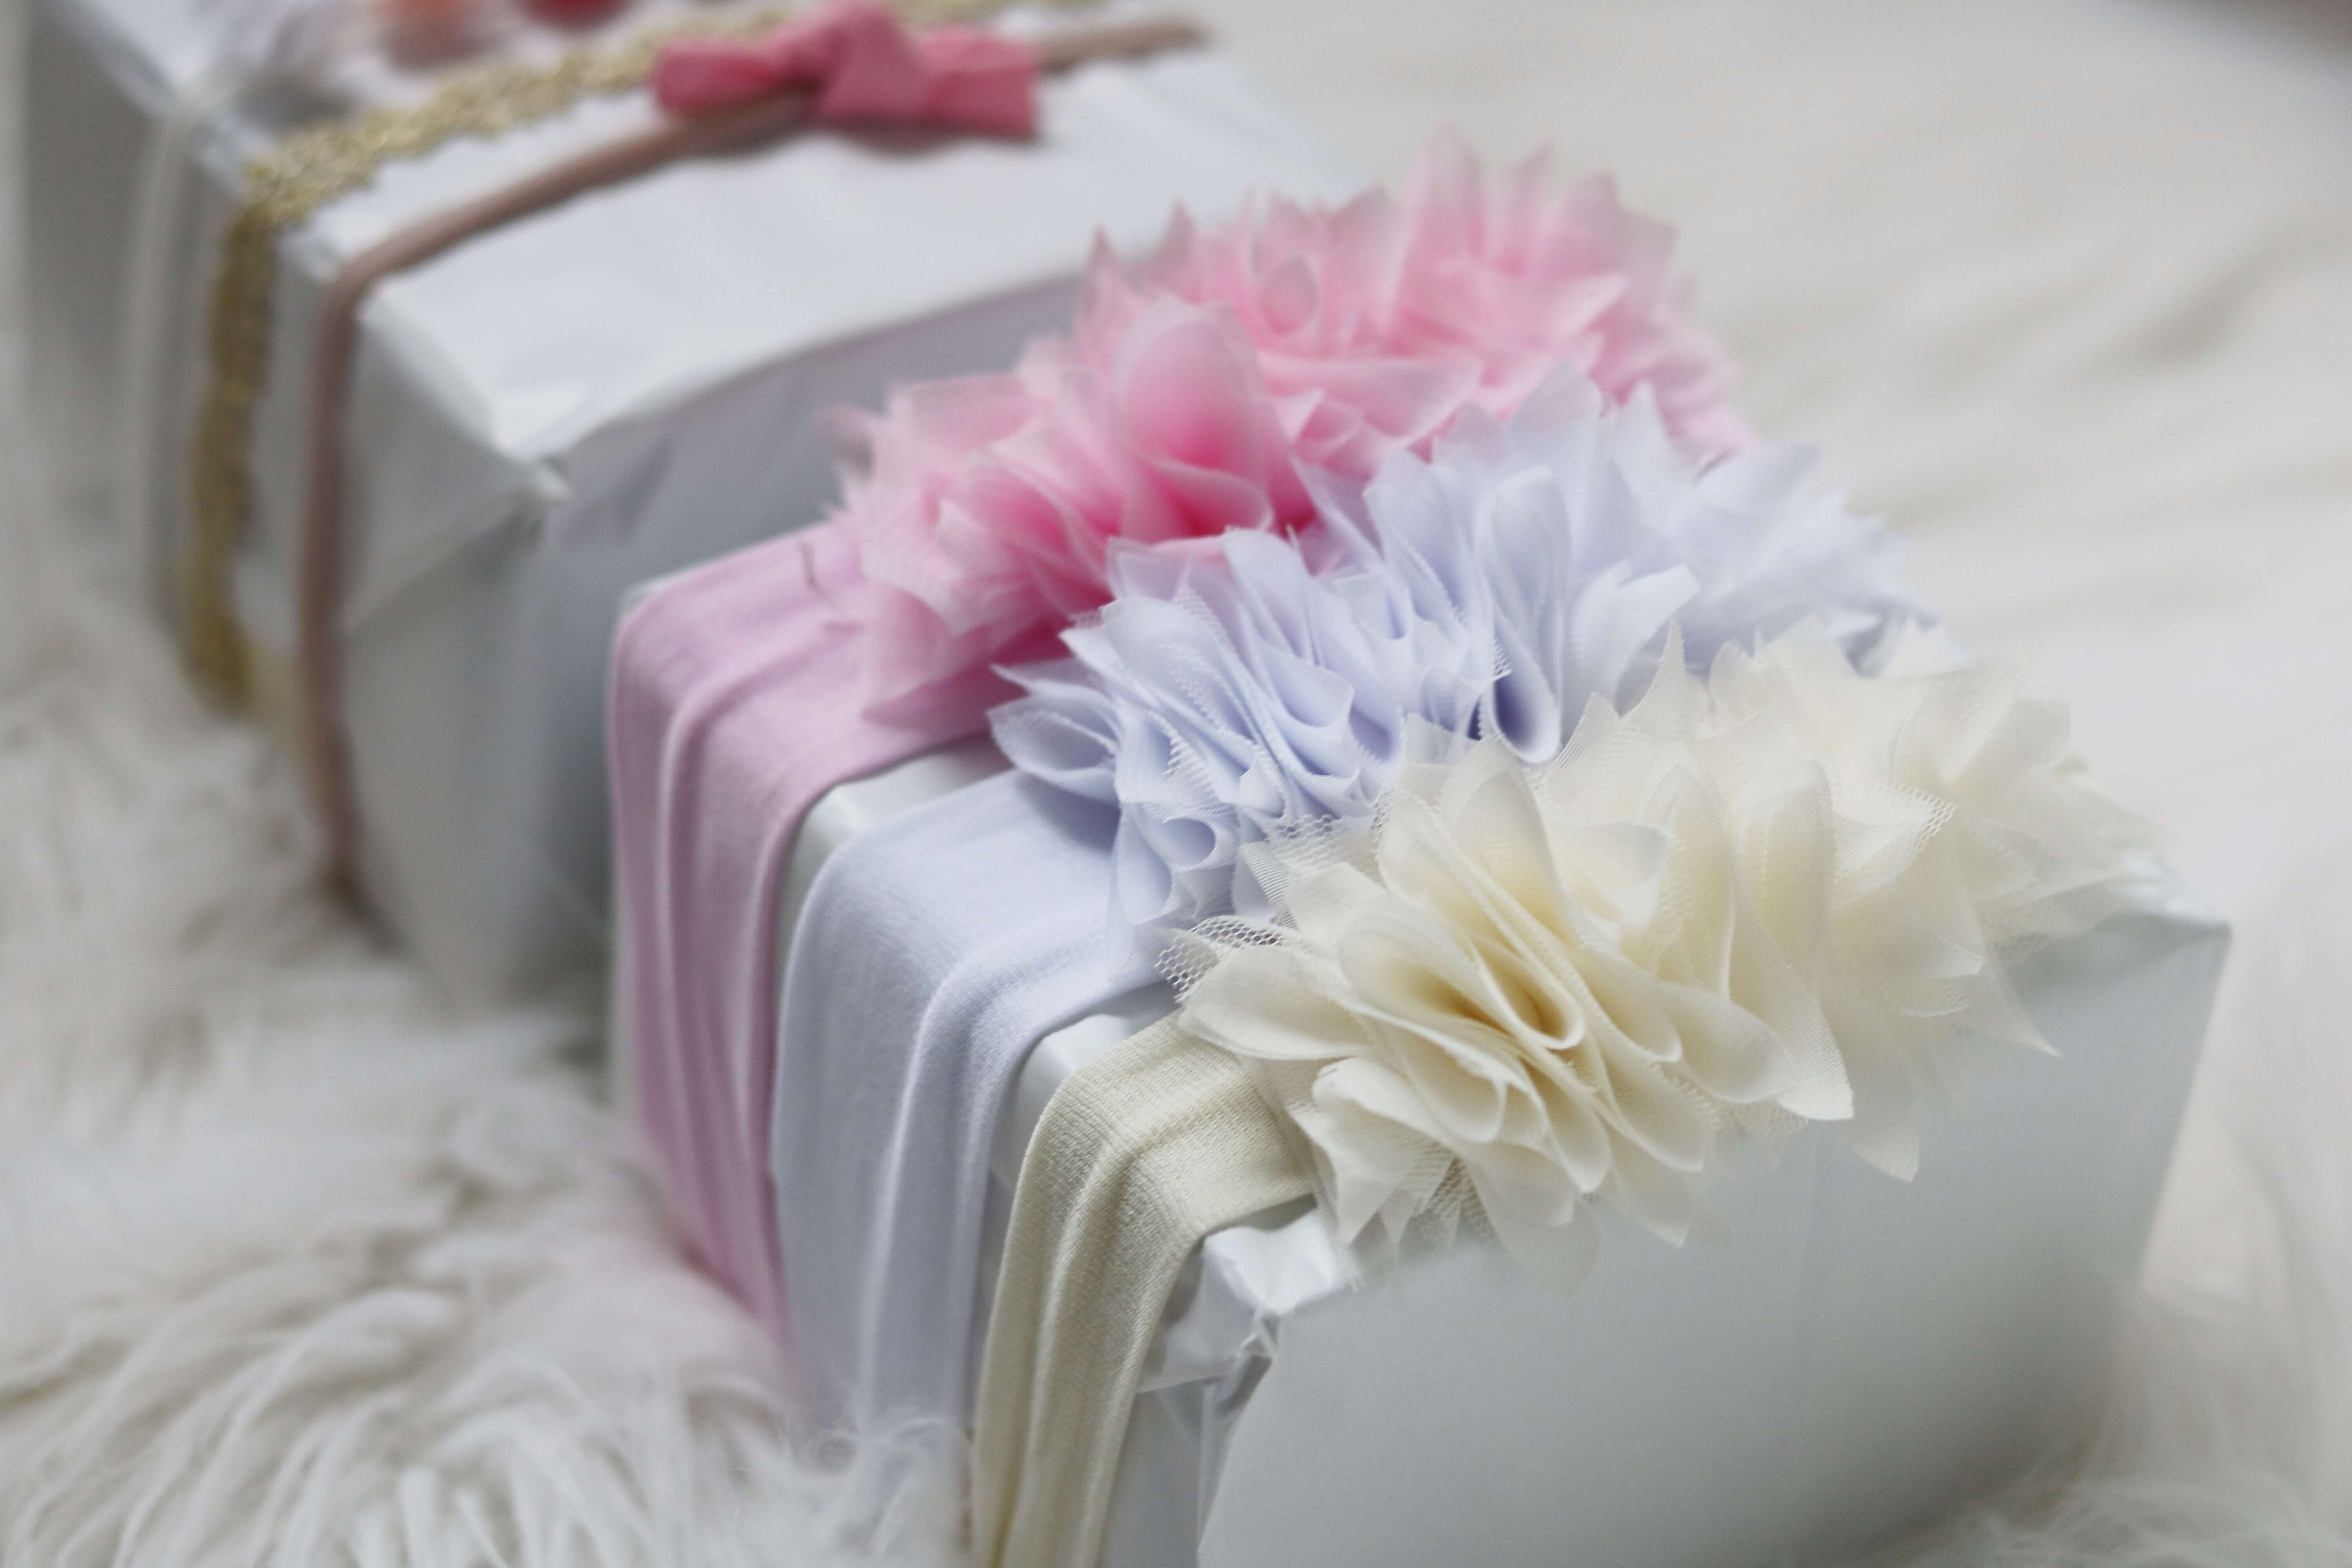 5 Favourite Baby Shower Gifts from buybuyBABY + Fun Gift Wrapping Ideas!  buybuyBABY Whitby